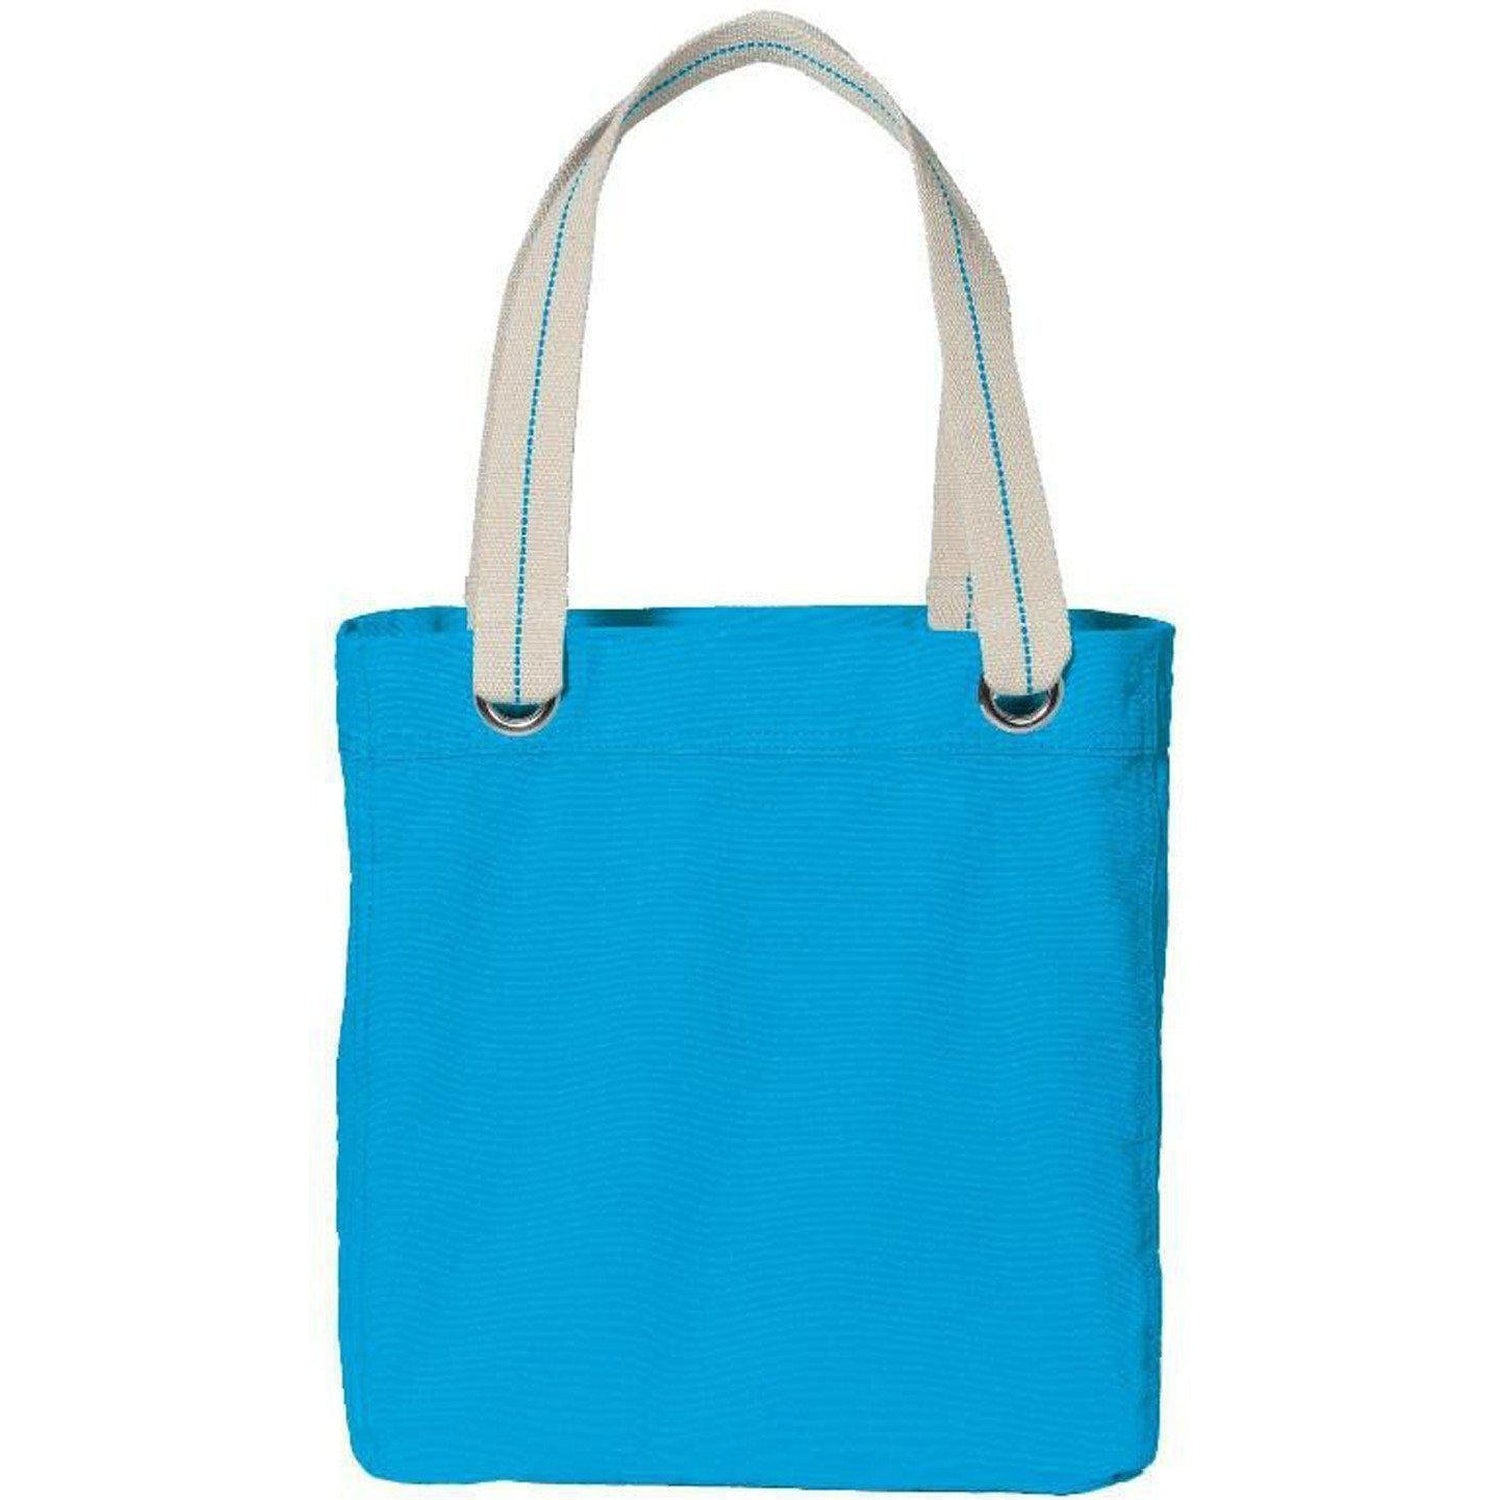 Sturdy and Cute Canvas Tote Bags Wholesale – BagzDepot™